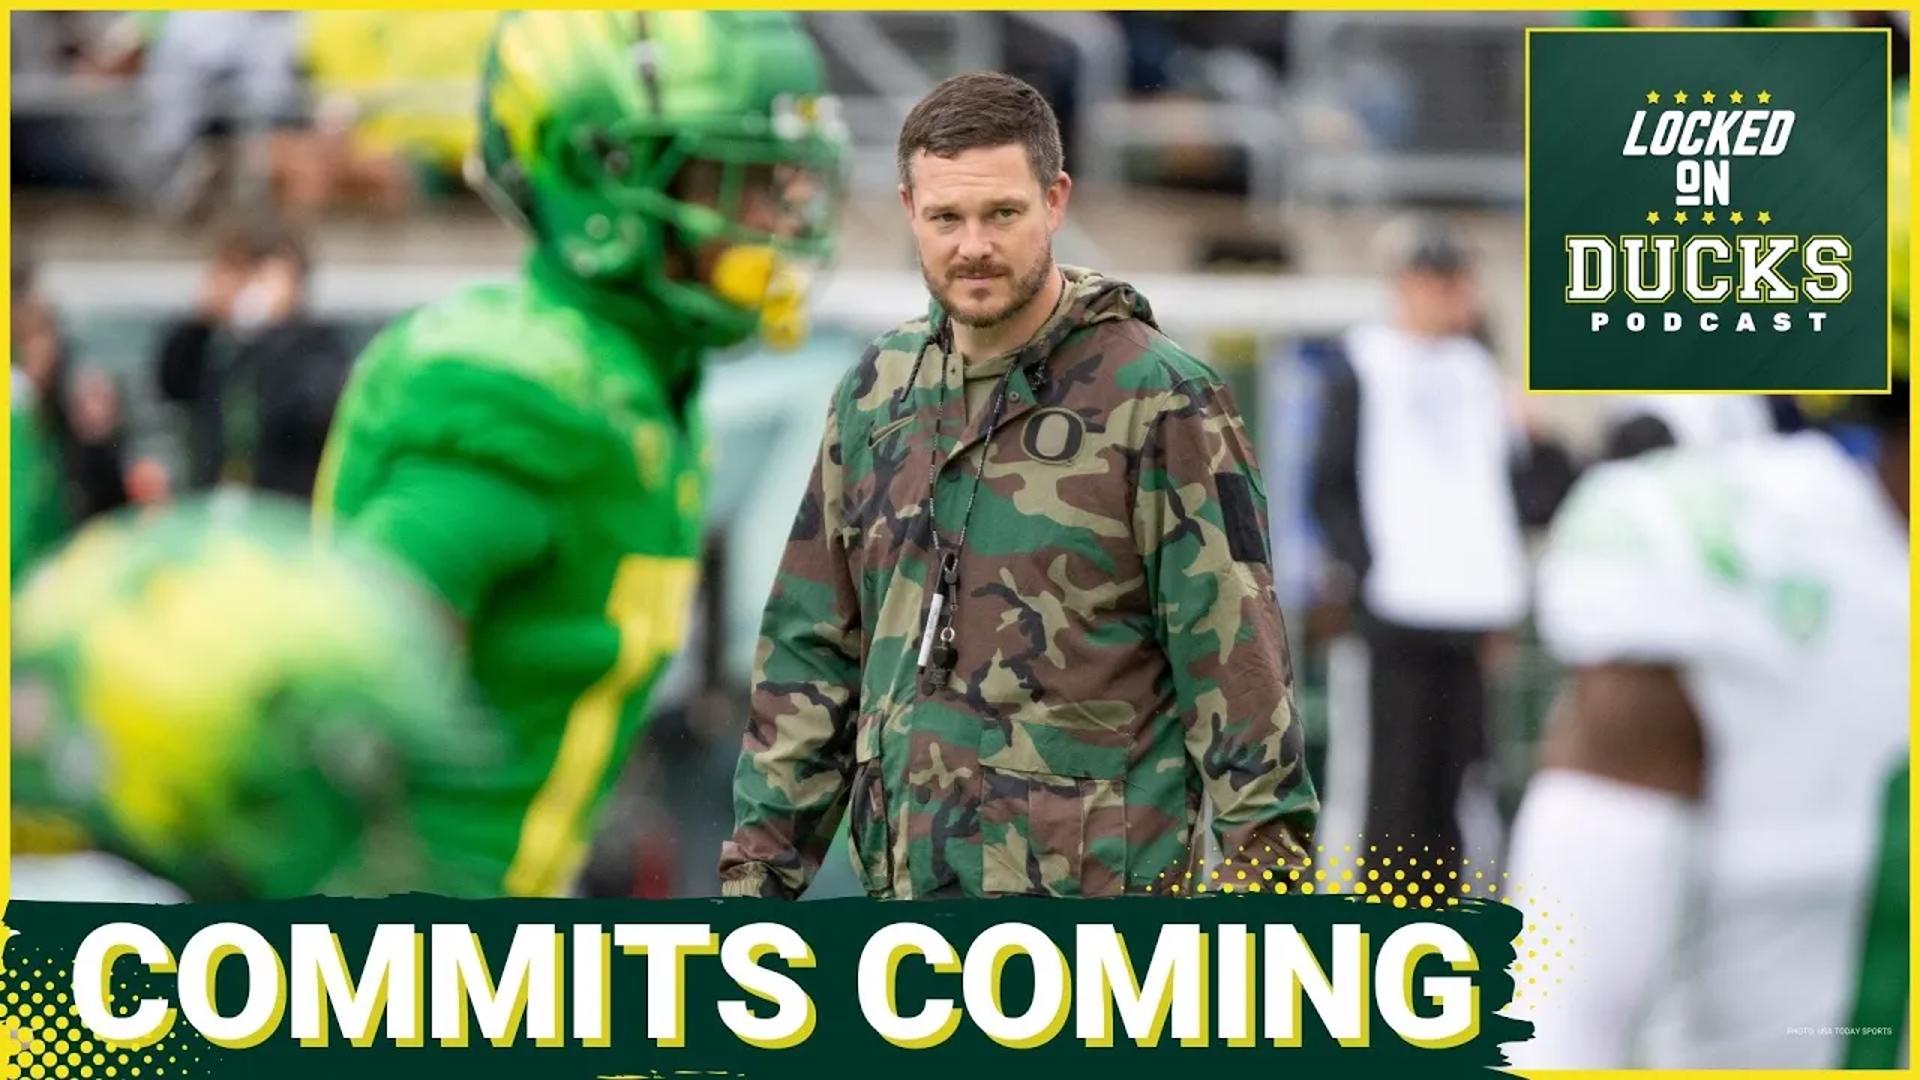 Oregon currently has 7 players committed in the 2025 recruiting cycle, with Dan Lanning and co. positioned to change that this month.